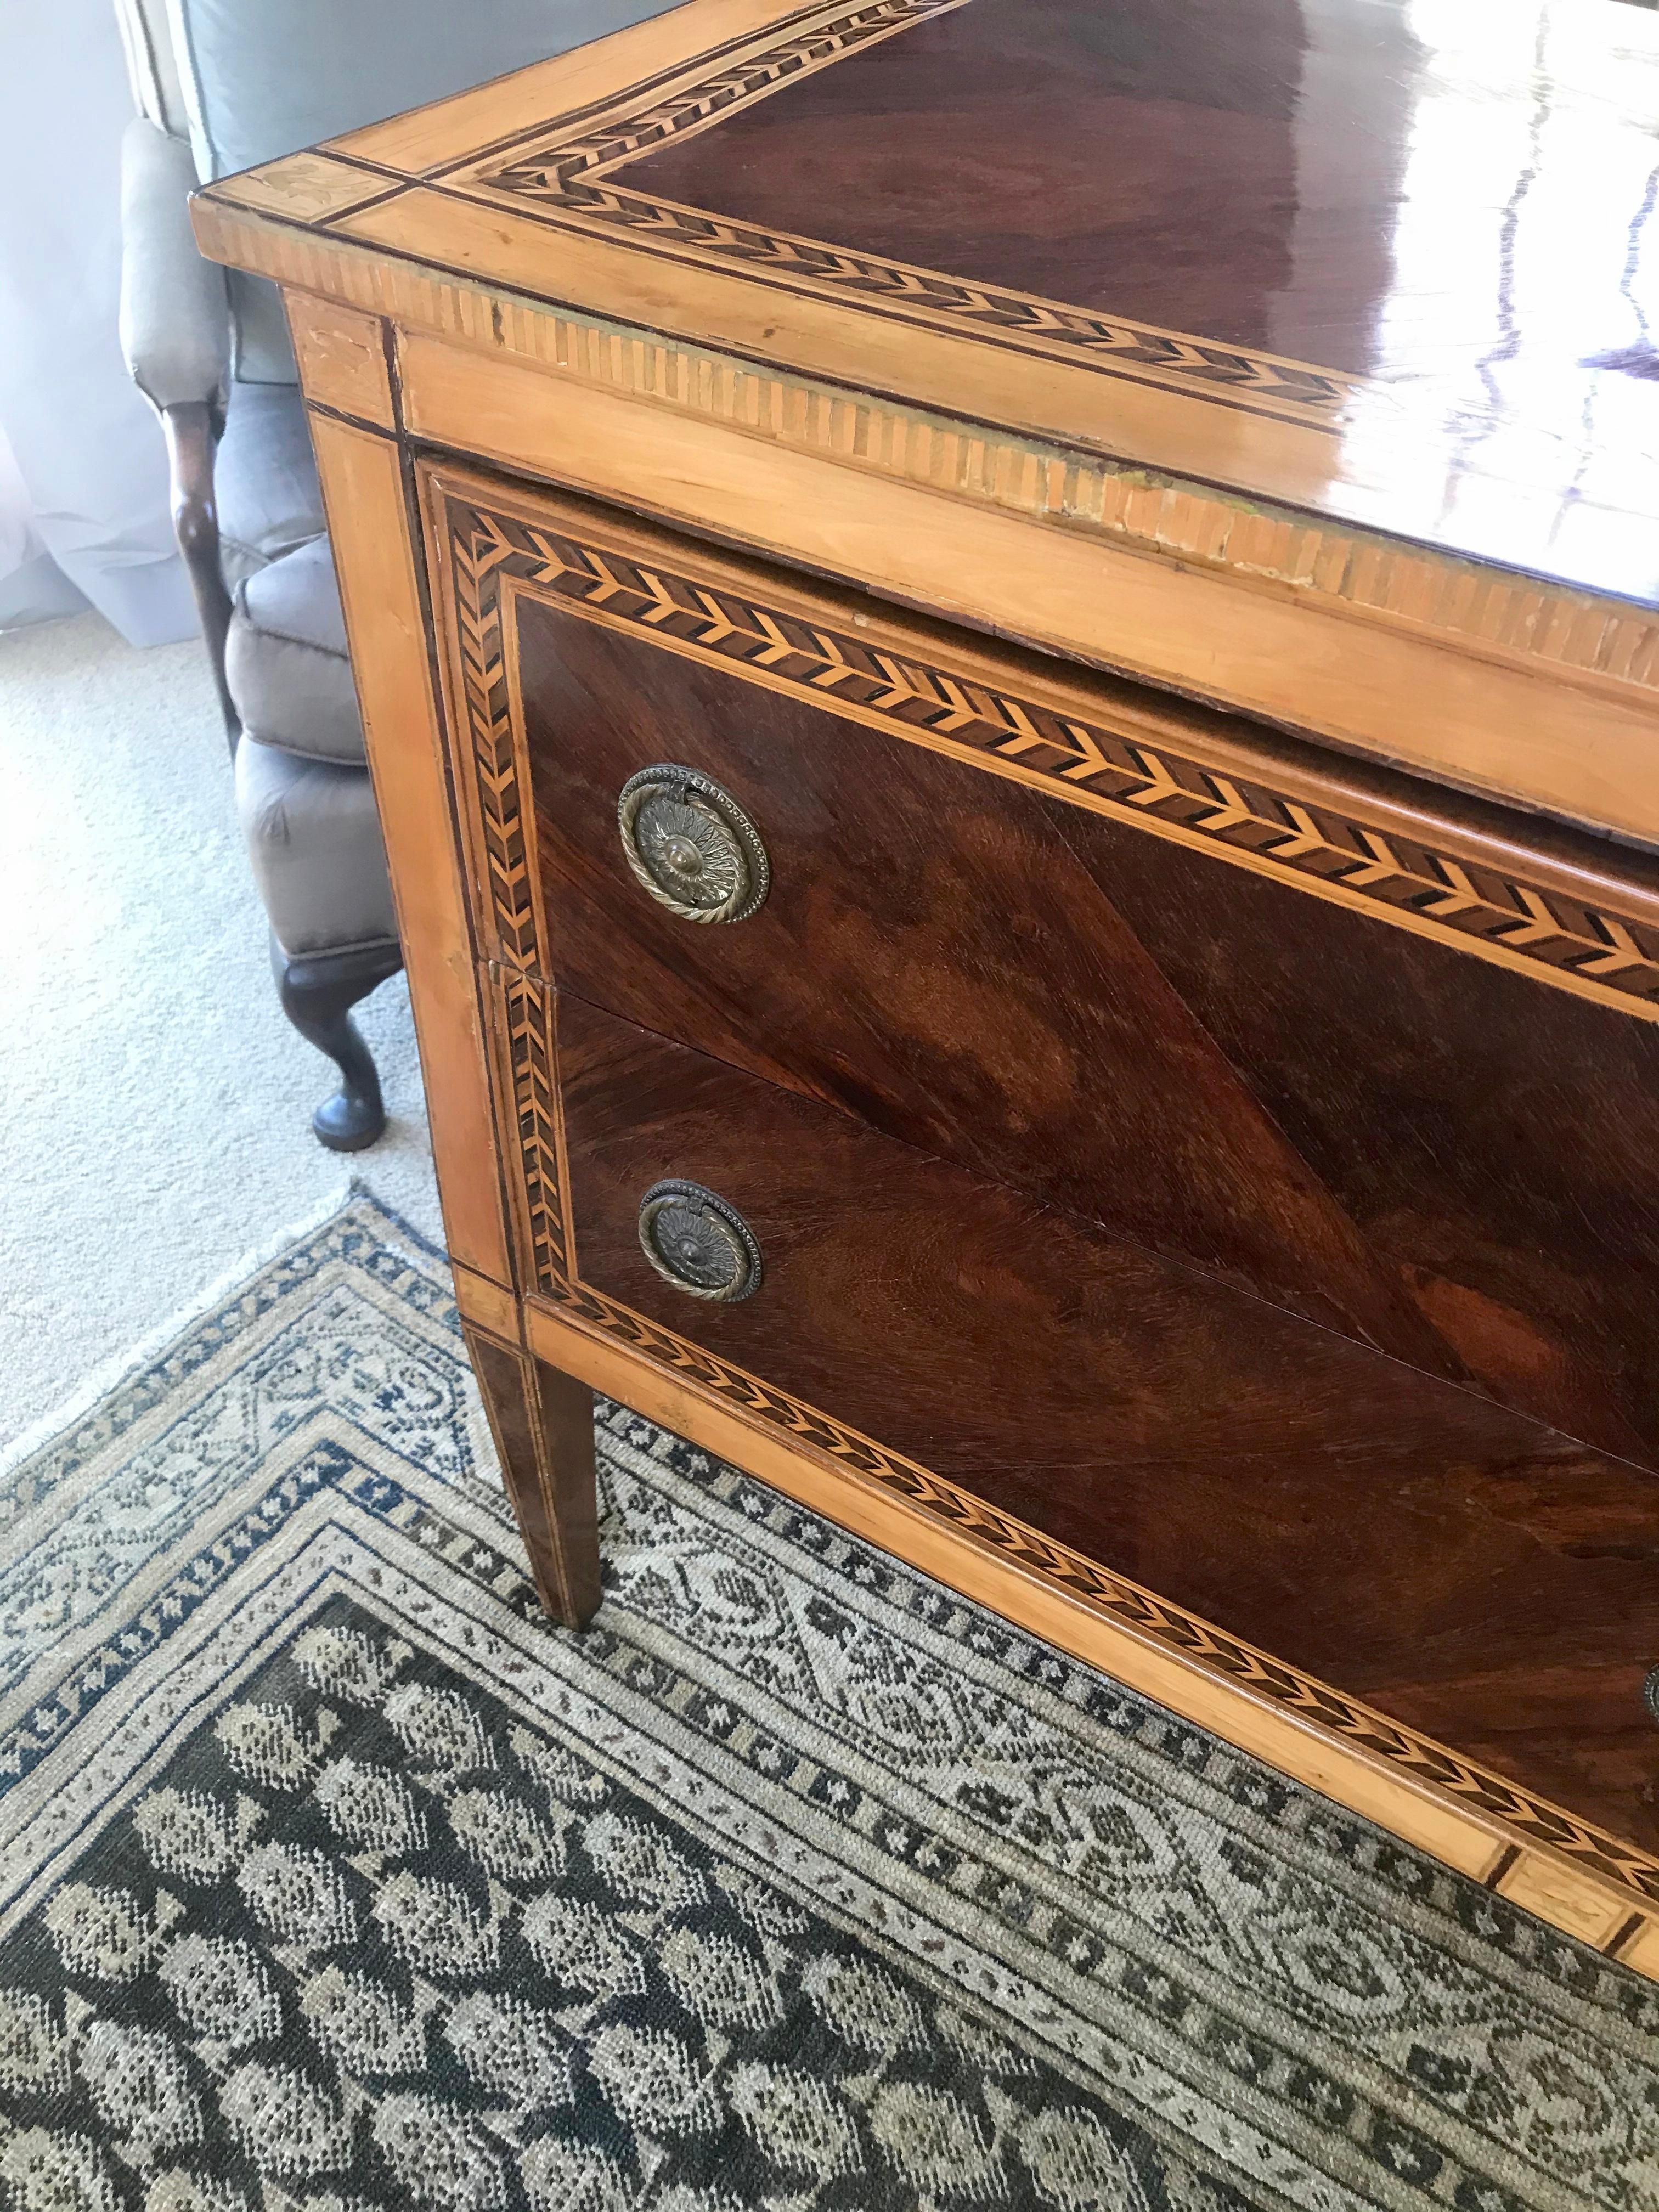 Italian neoclassical lemonwood and amaranth chest of drawers commode. Italian neoclassical chest of drawers Louis XVI antique commode in beautifully patinated amaranth and lemonwood marquetry inlay with birds, ducks and butterflies; refurbished with